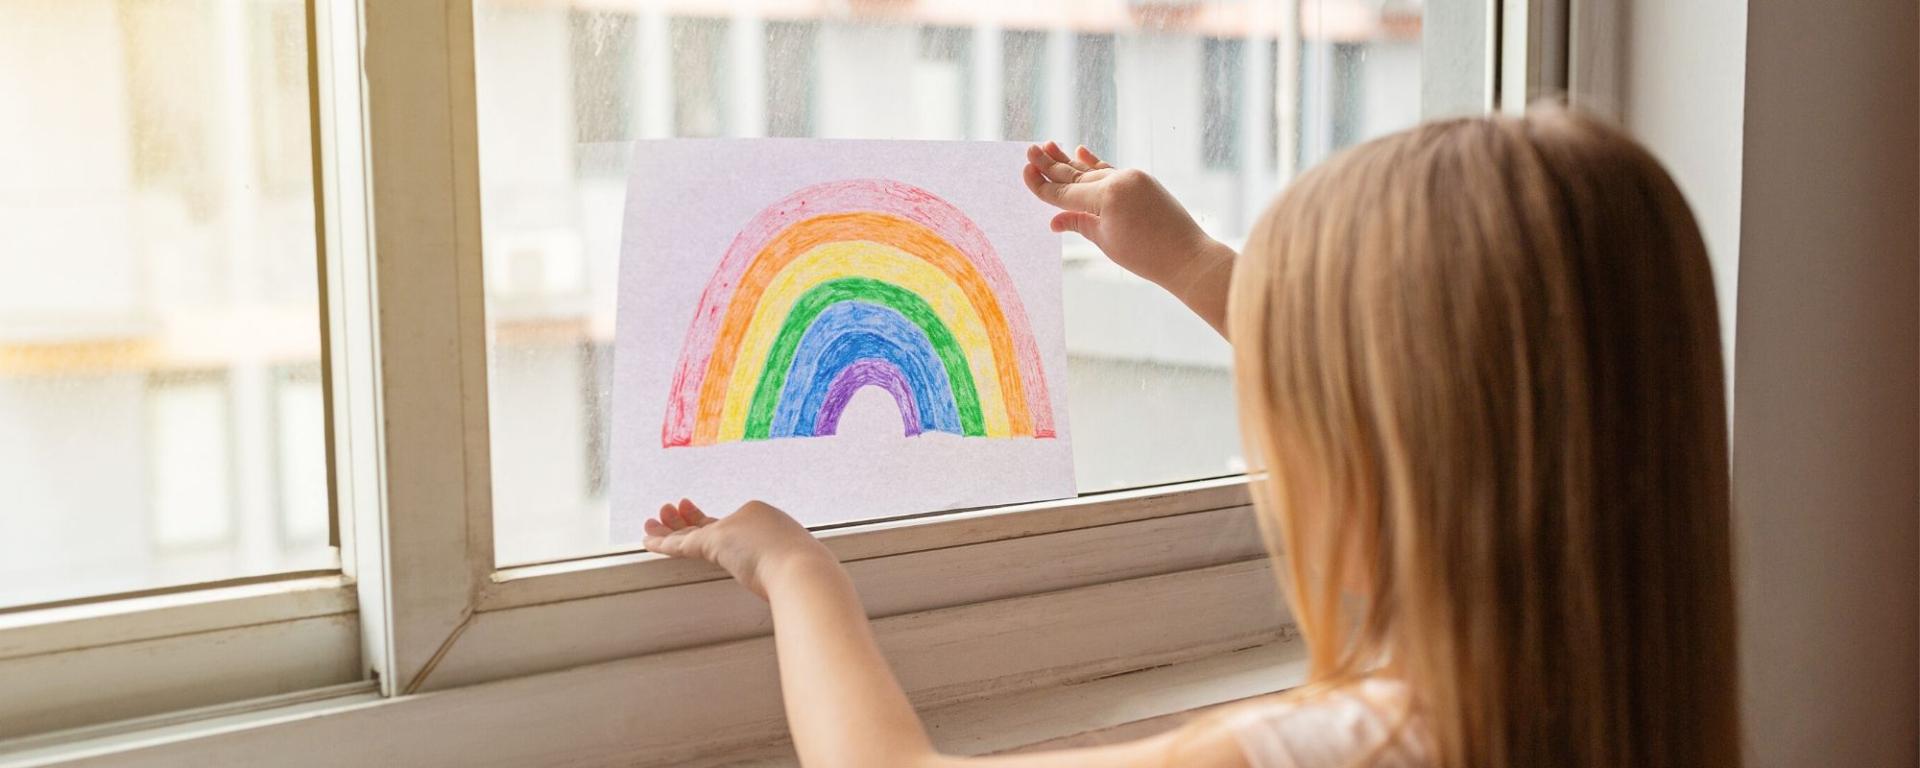 Girl Putting Her Rainbow Picture In The Window.jpeg